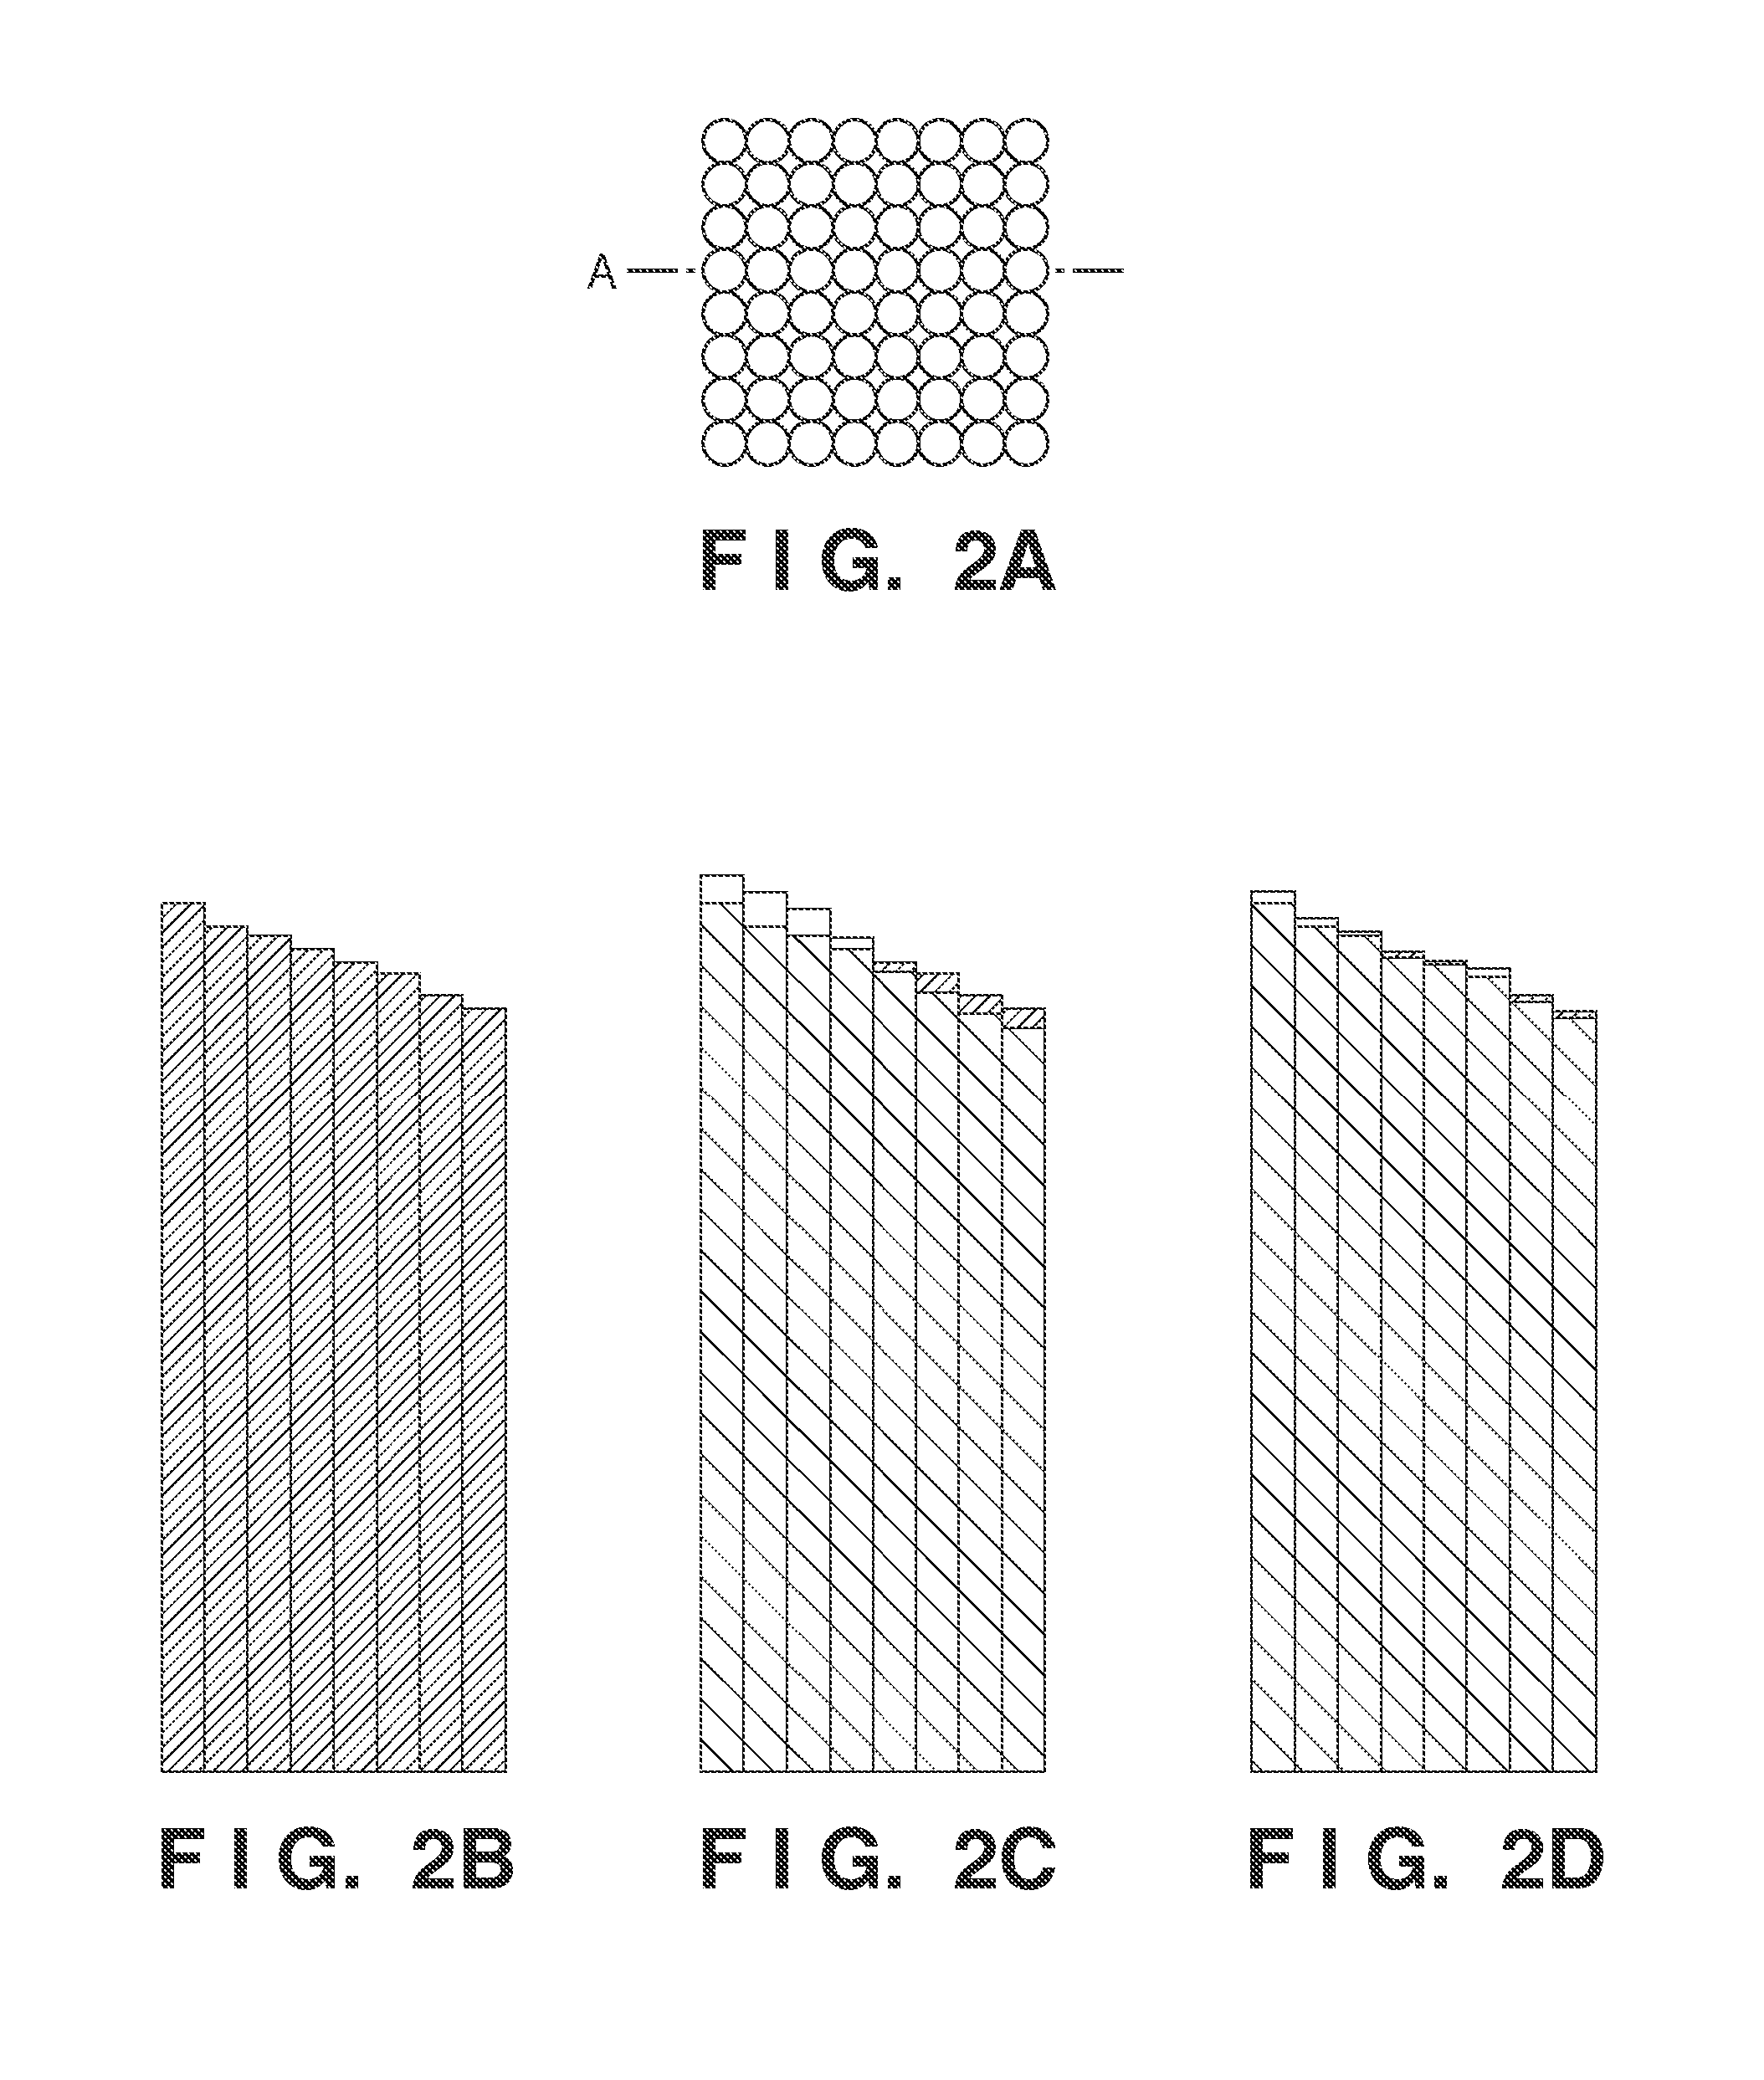 Moving image encoding apparatus, method of controlling the same, and computer readable storage medium